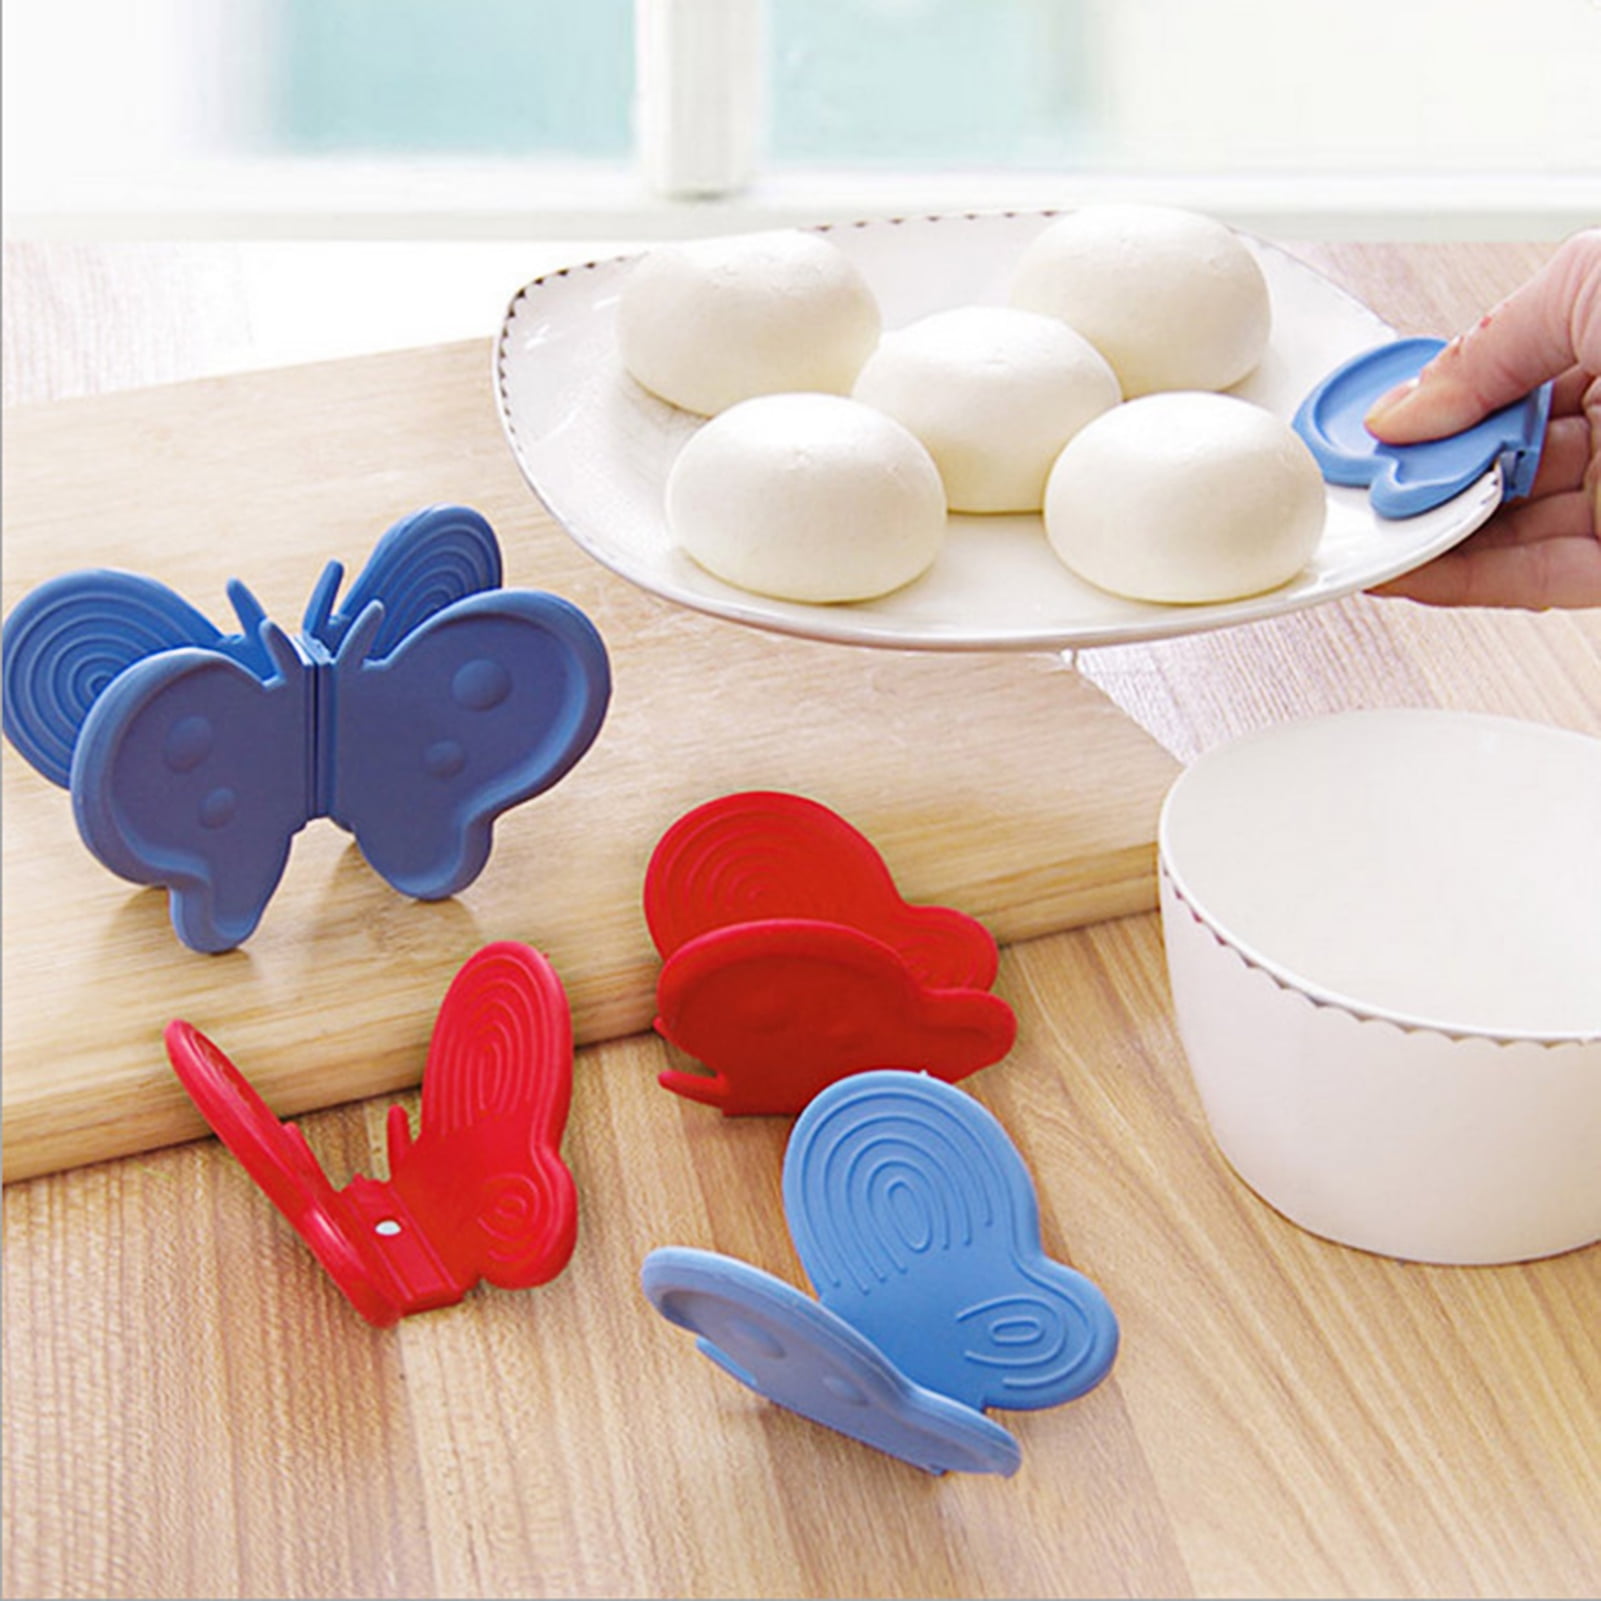 Adorable Butterfly-Shaped Silicone Anti-Scald Device Kitchen Tool Gadget Random 